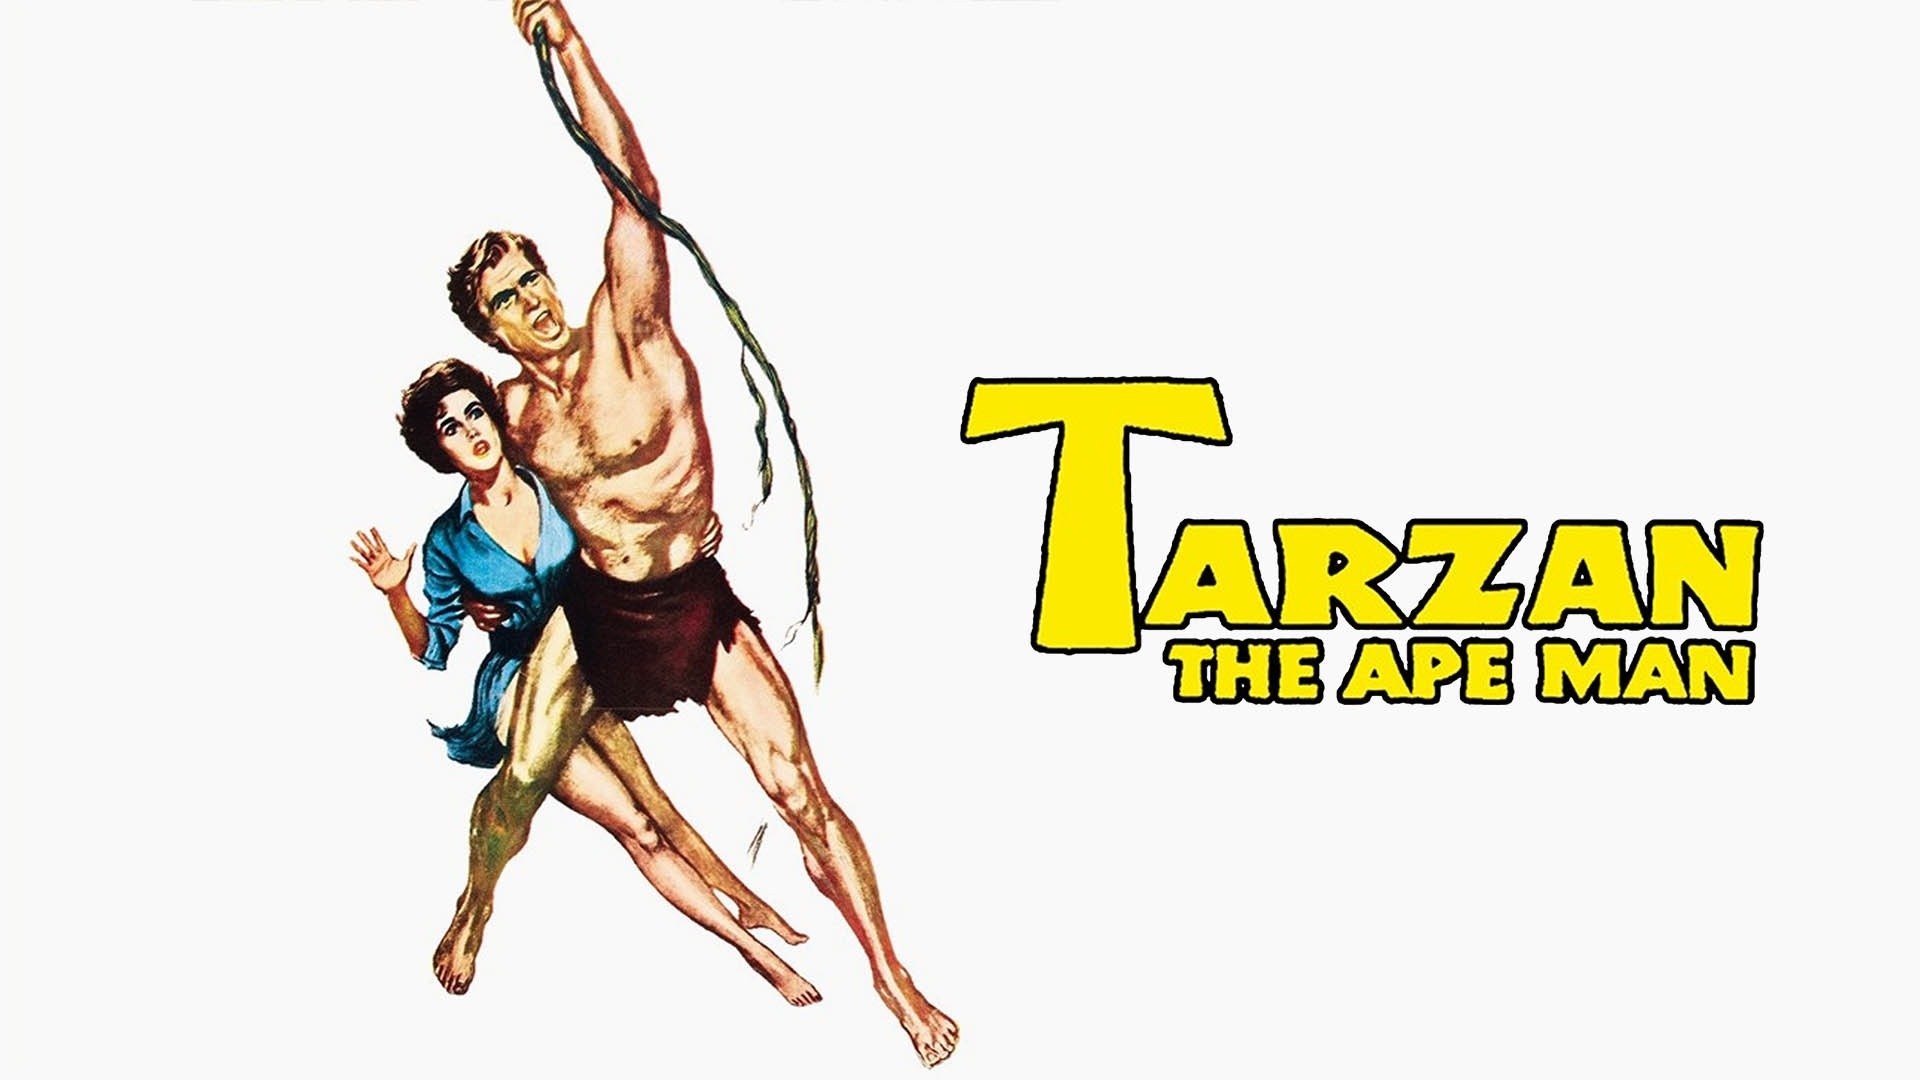 46-facts-about-the-movie-tarzan-the-ape-man